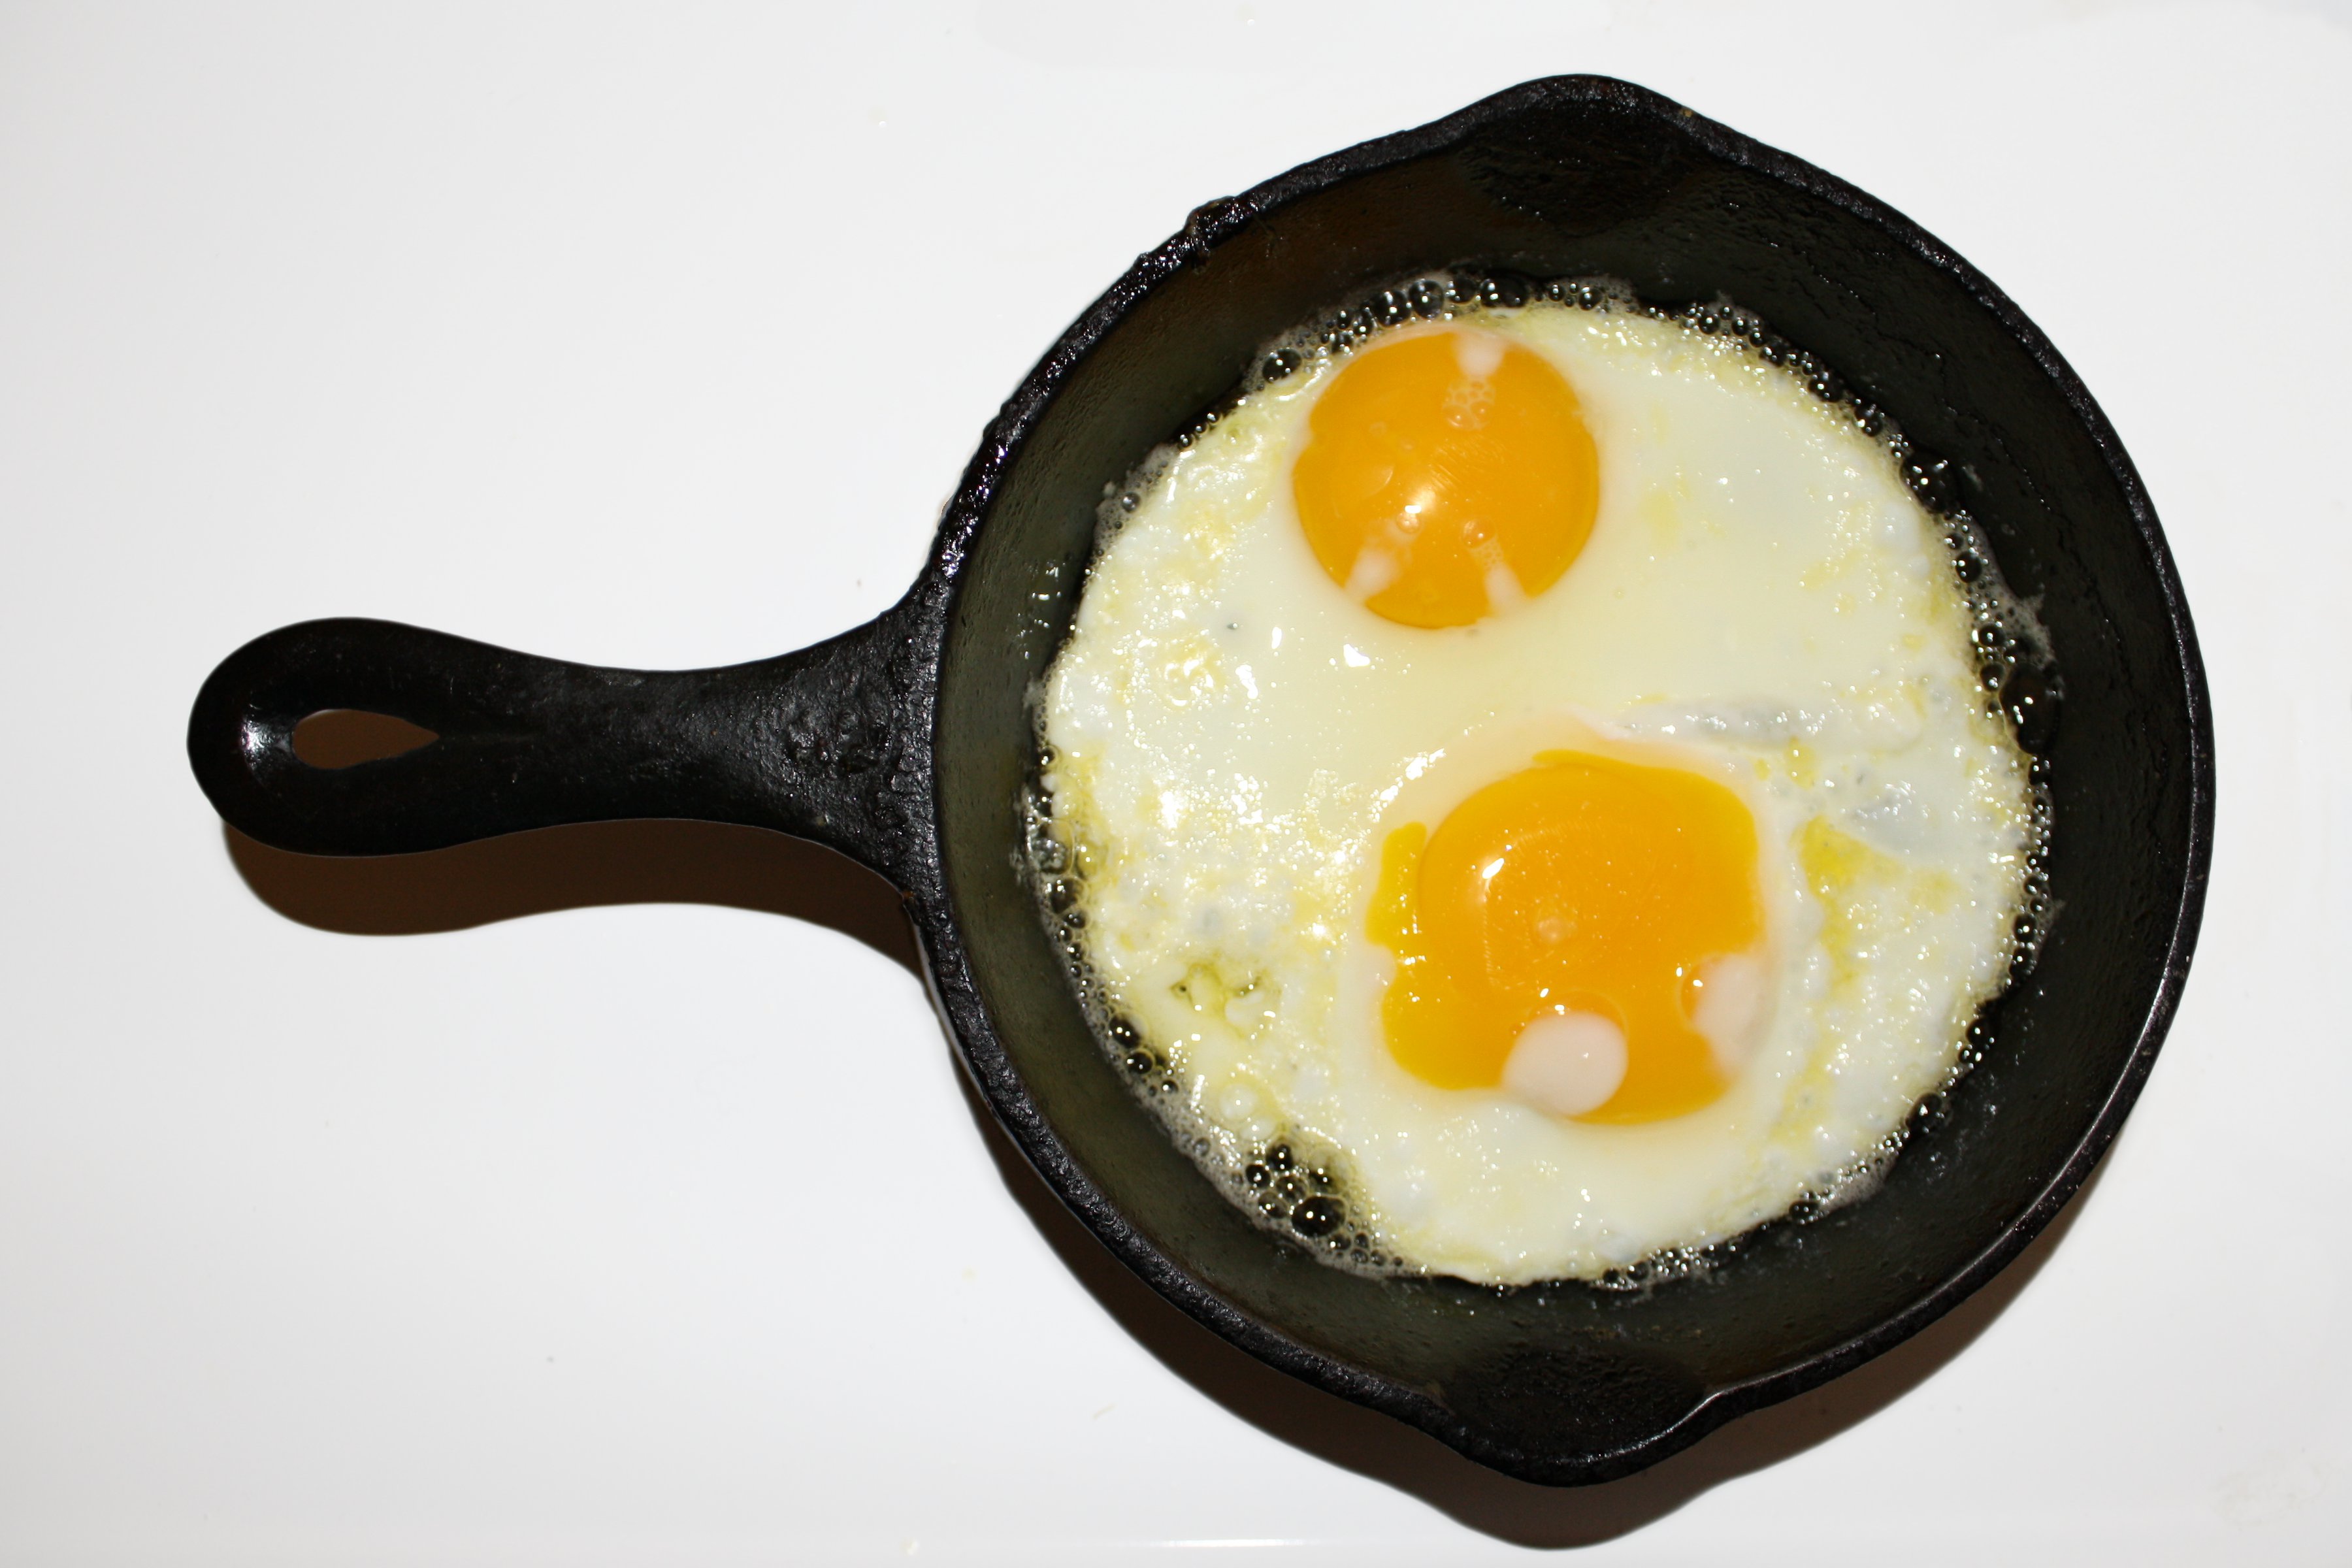 https://www.photos-public-domain.com/wp-content/uploads/2011/02/fried-eggs-sunny-side-up-in-cast-iron-skillet.jpg